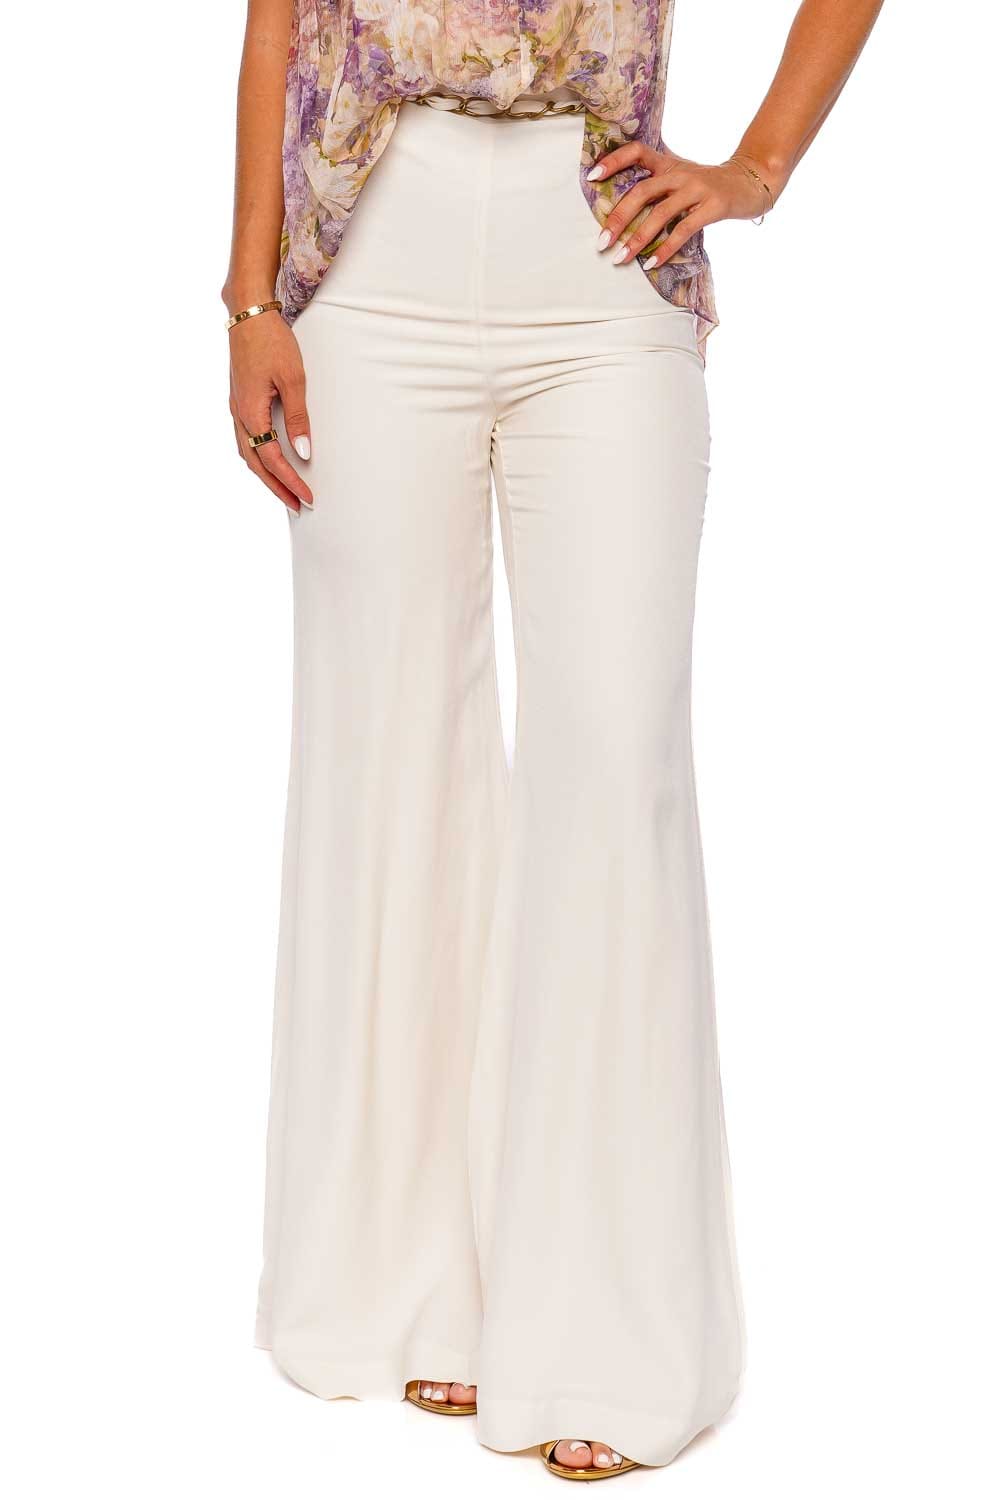 ZIMMERMANN Cream Skinny Flare Belted Pant